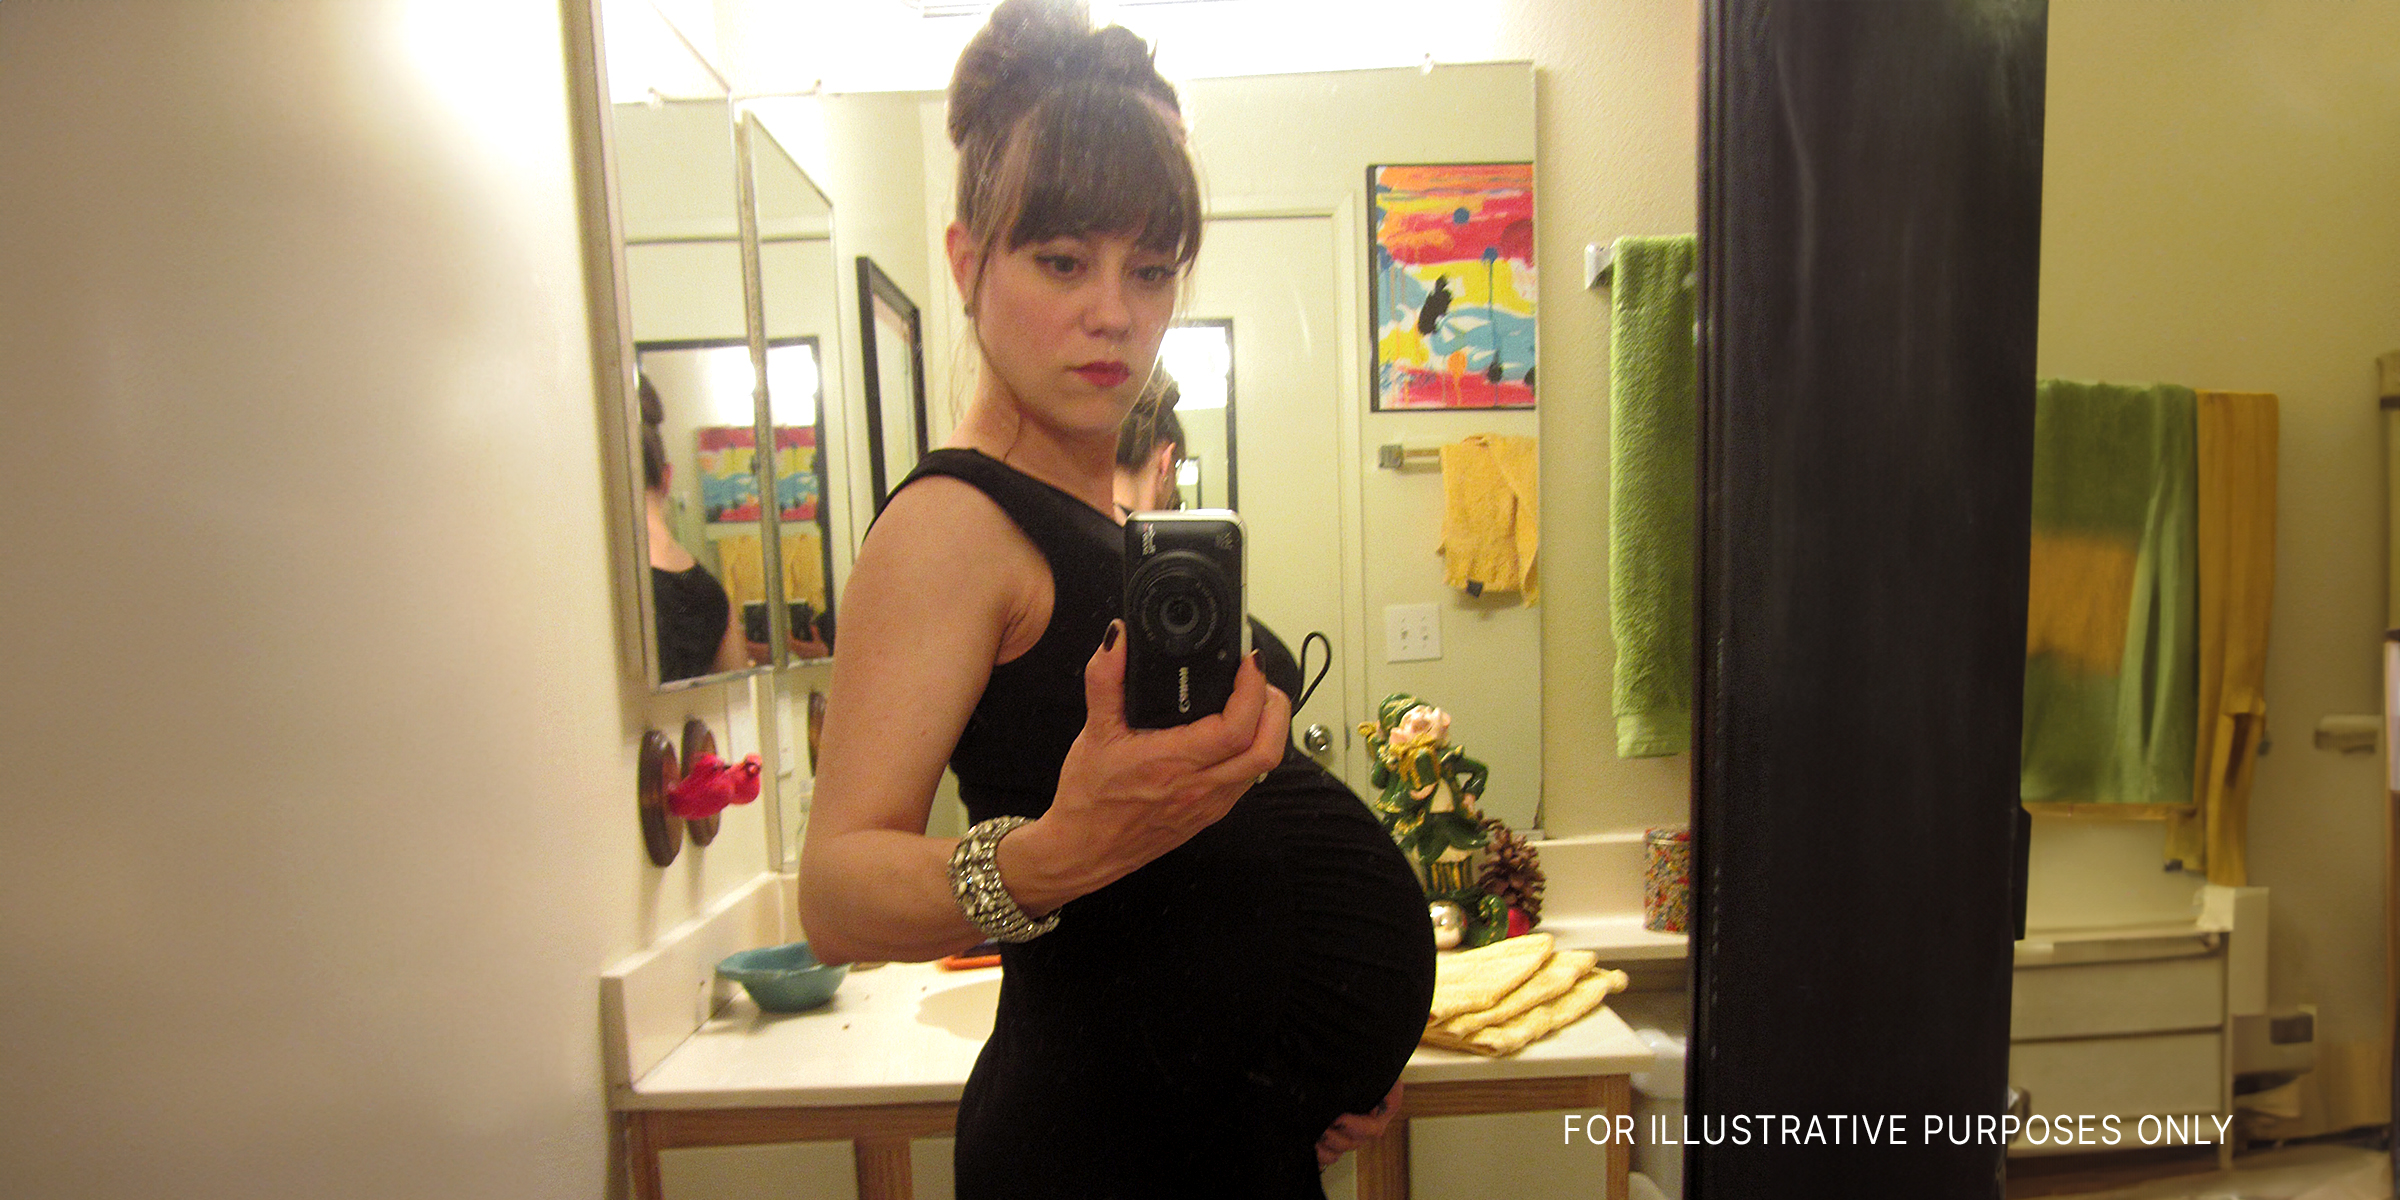 A pregnant woman taking a selfie | Source: Flickr/Pretty Poo Eater/CC BY-SA 2.0